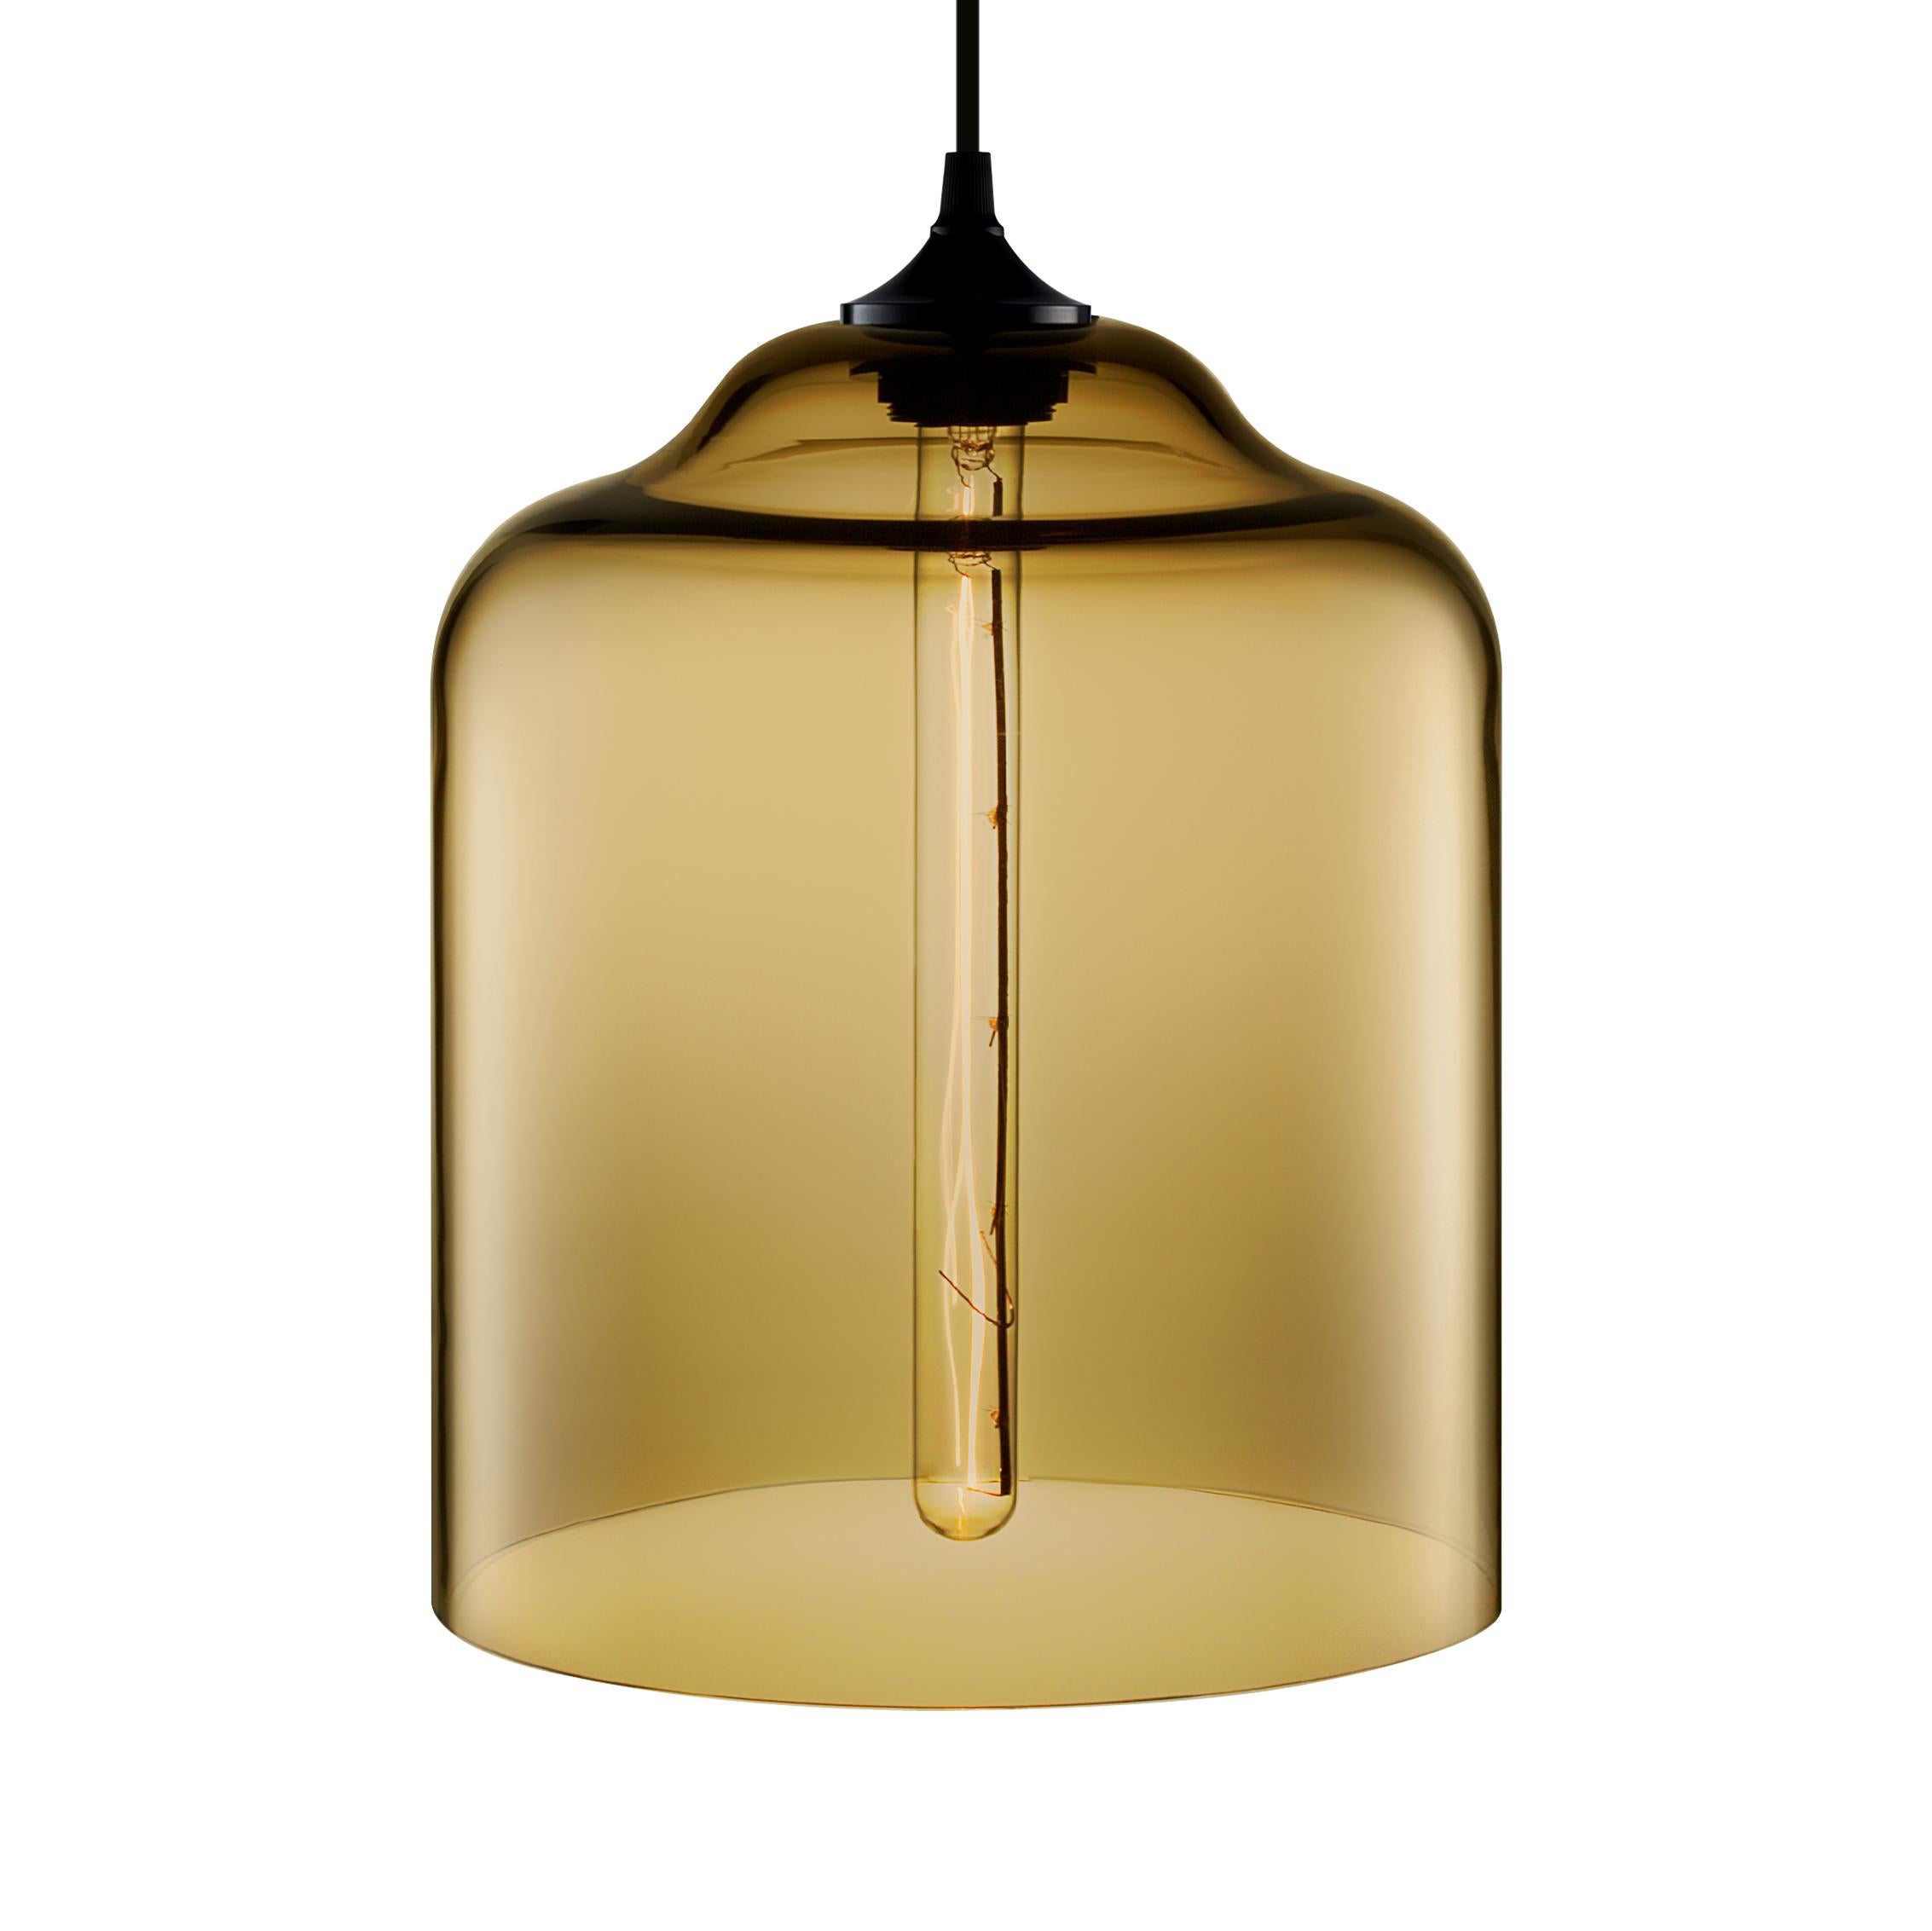 Bell Jar Amber Handblown Modern Glass Pendant Light, Made in the USA In New Condition For Sale In Beacon, NY